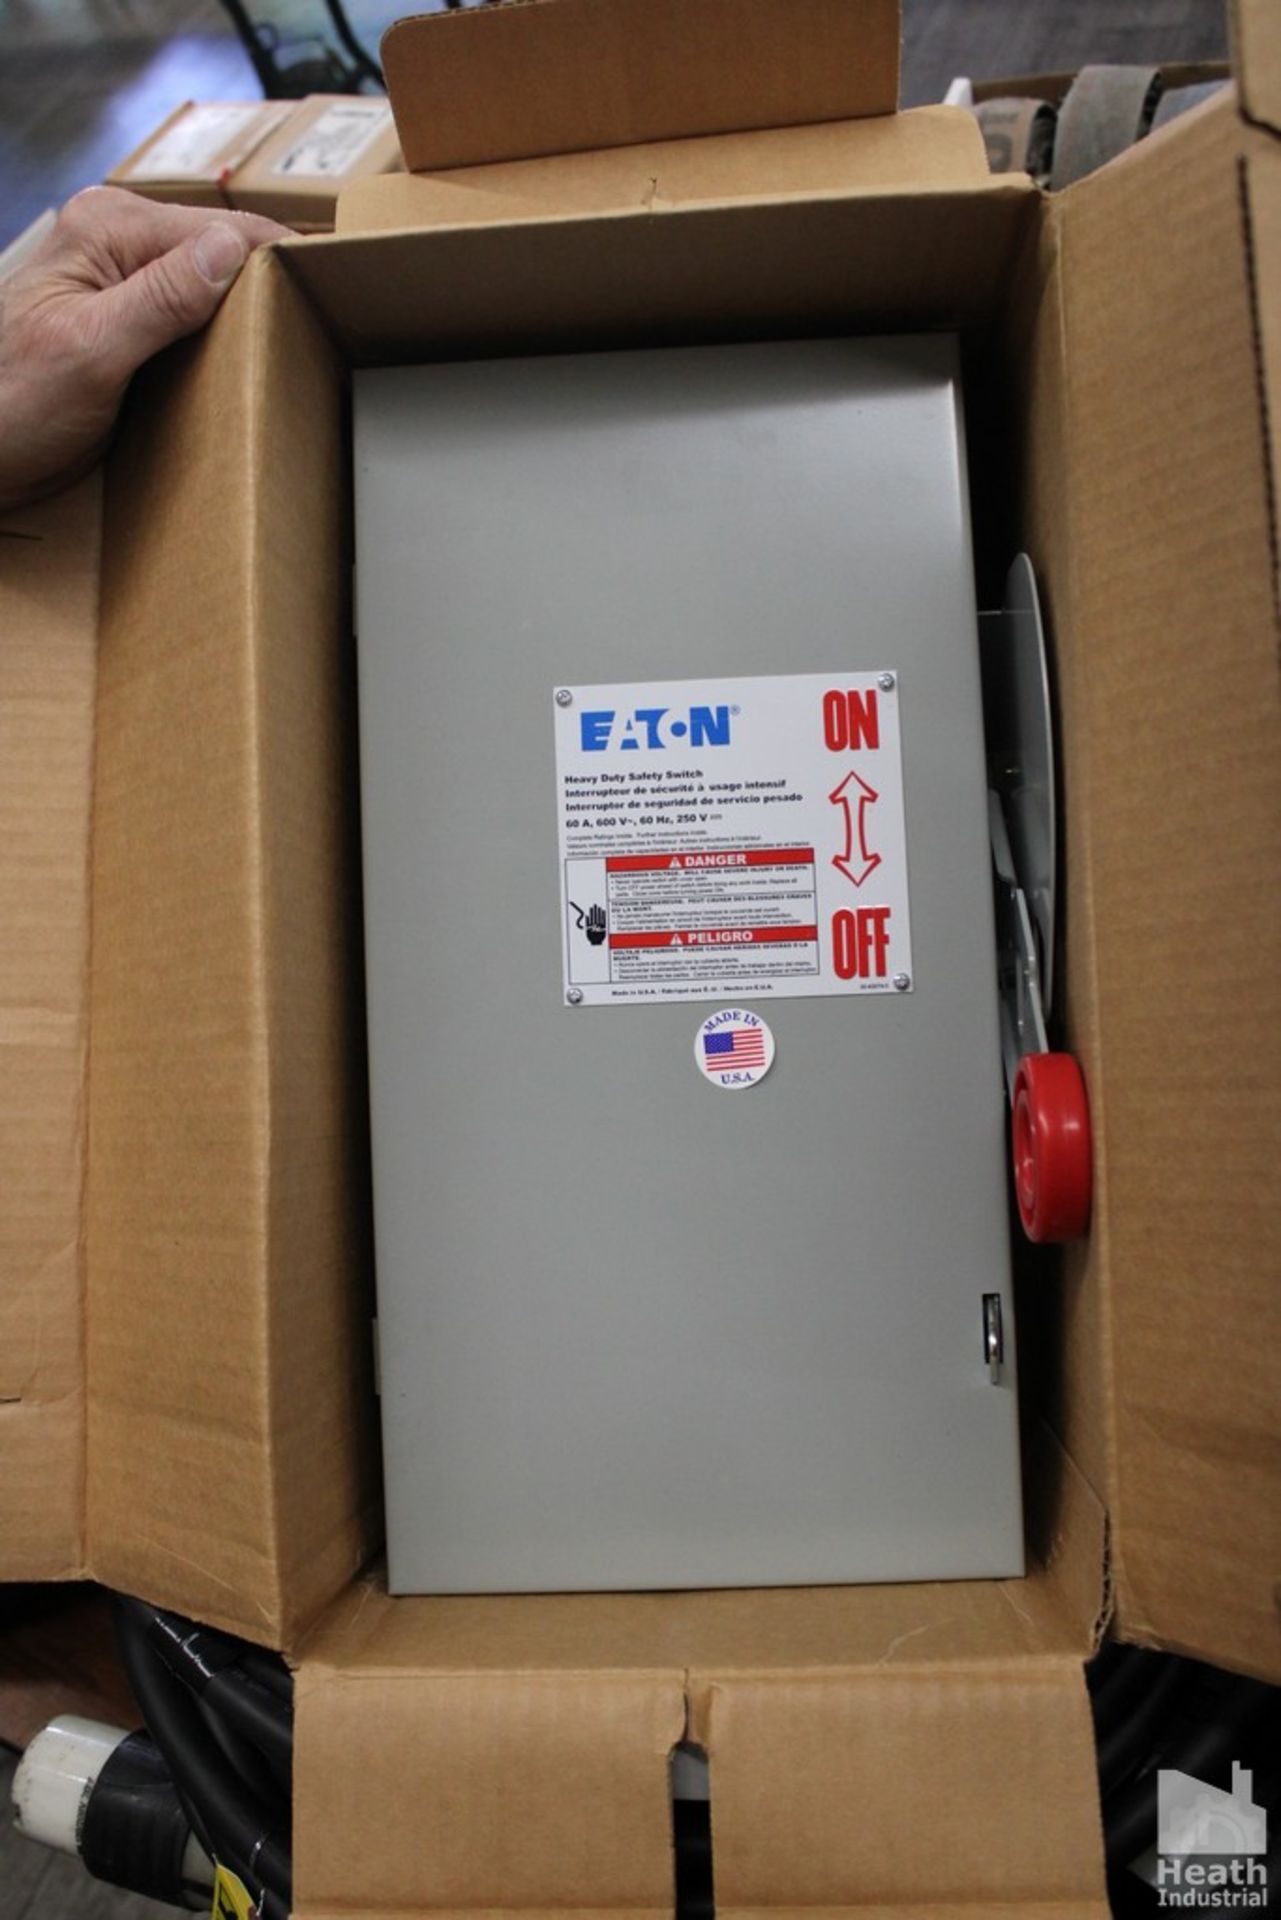 EATON 60AMP HEAVY DUTY SAFETY SWITCH, MODEL DH362FGK, NEW IN BOX - Image 2 of 3